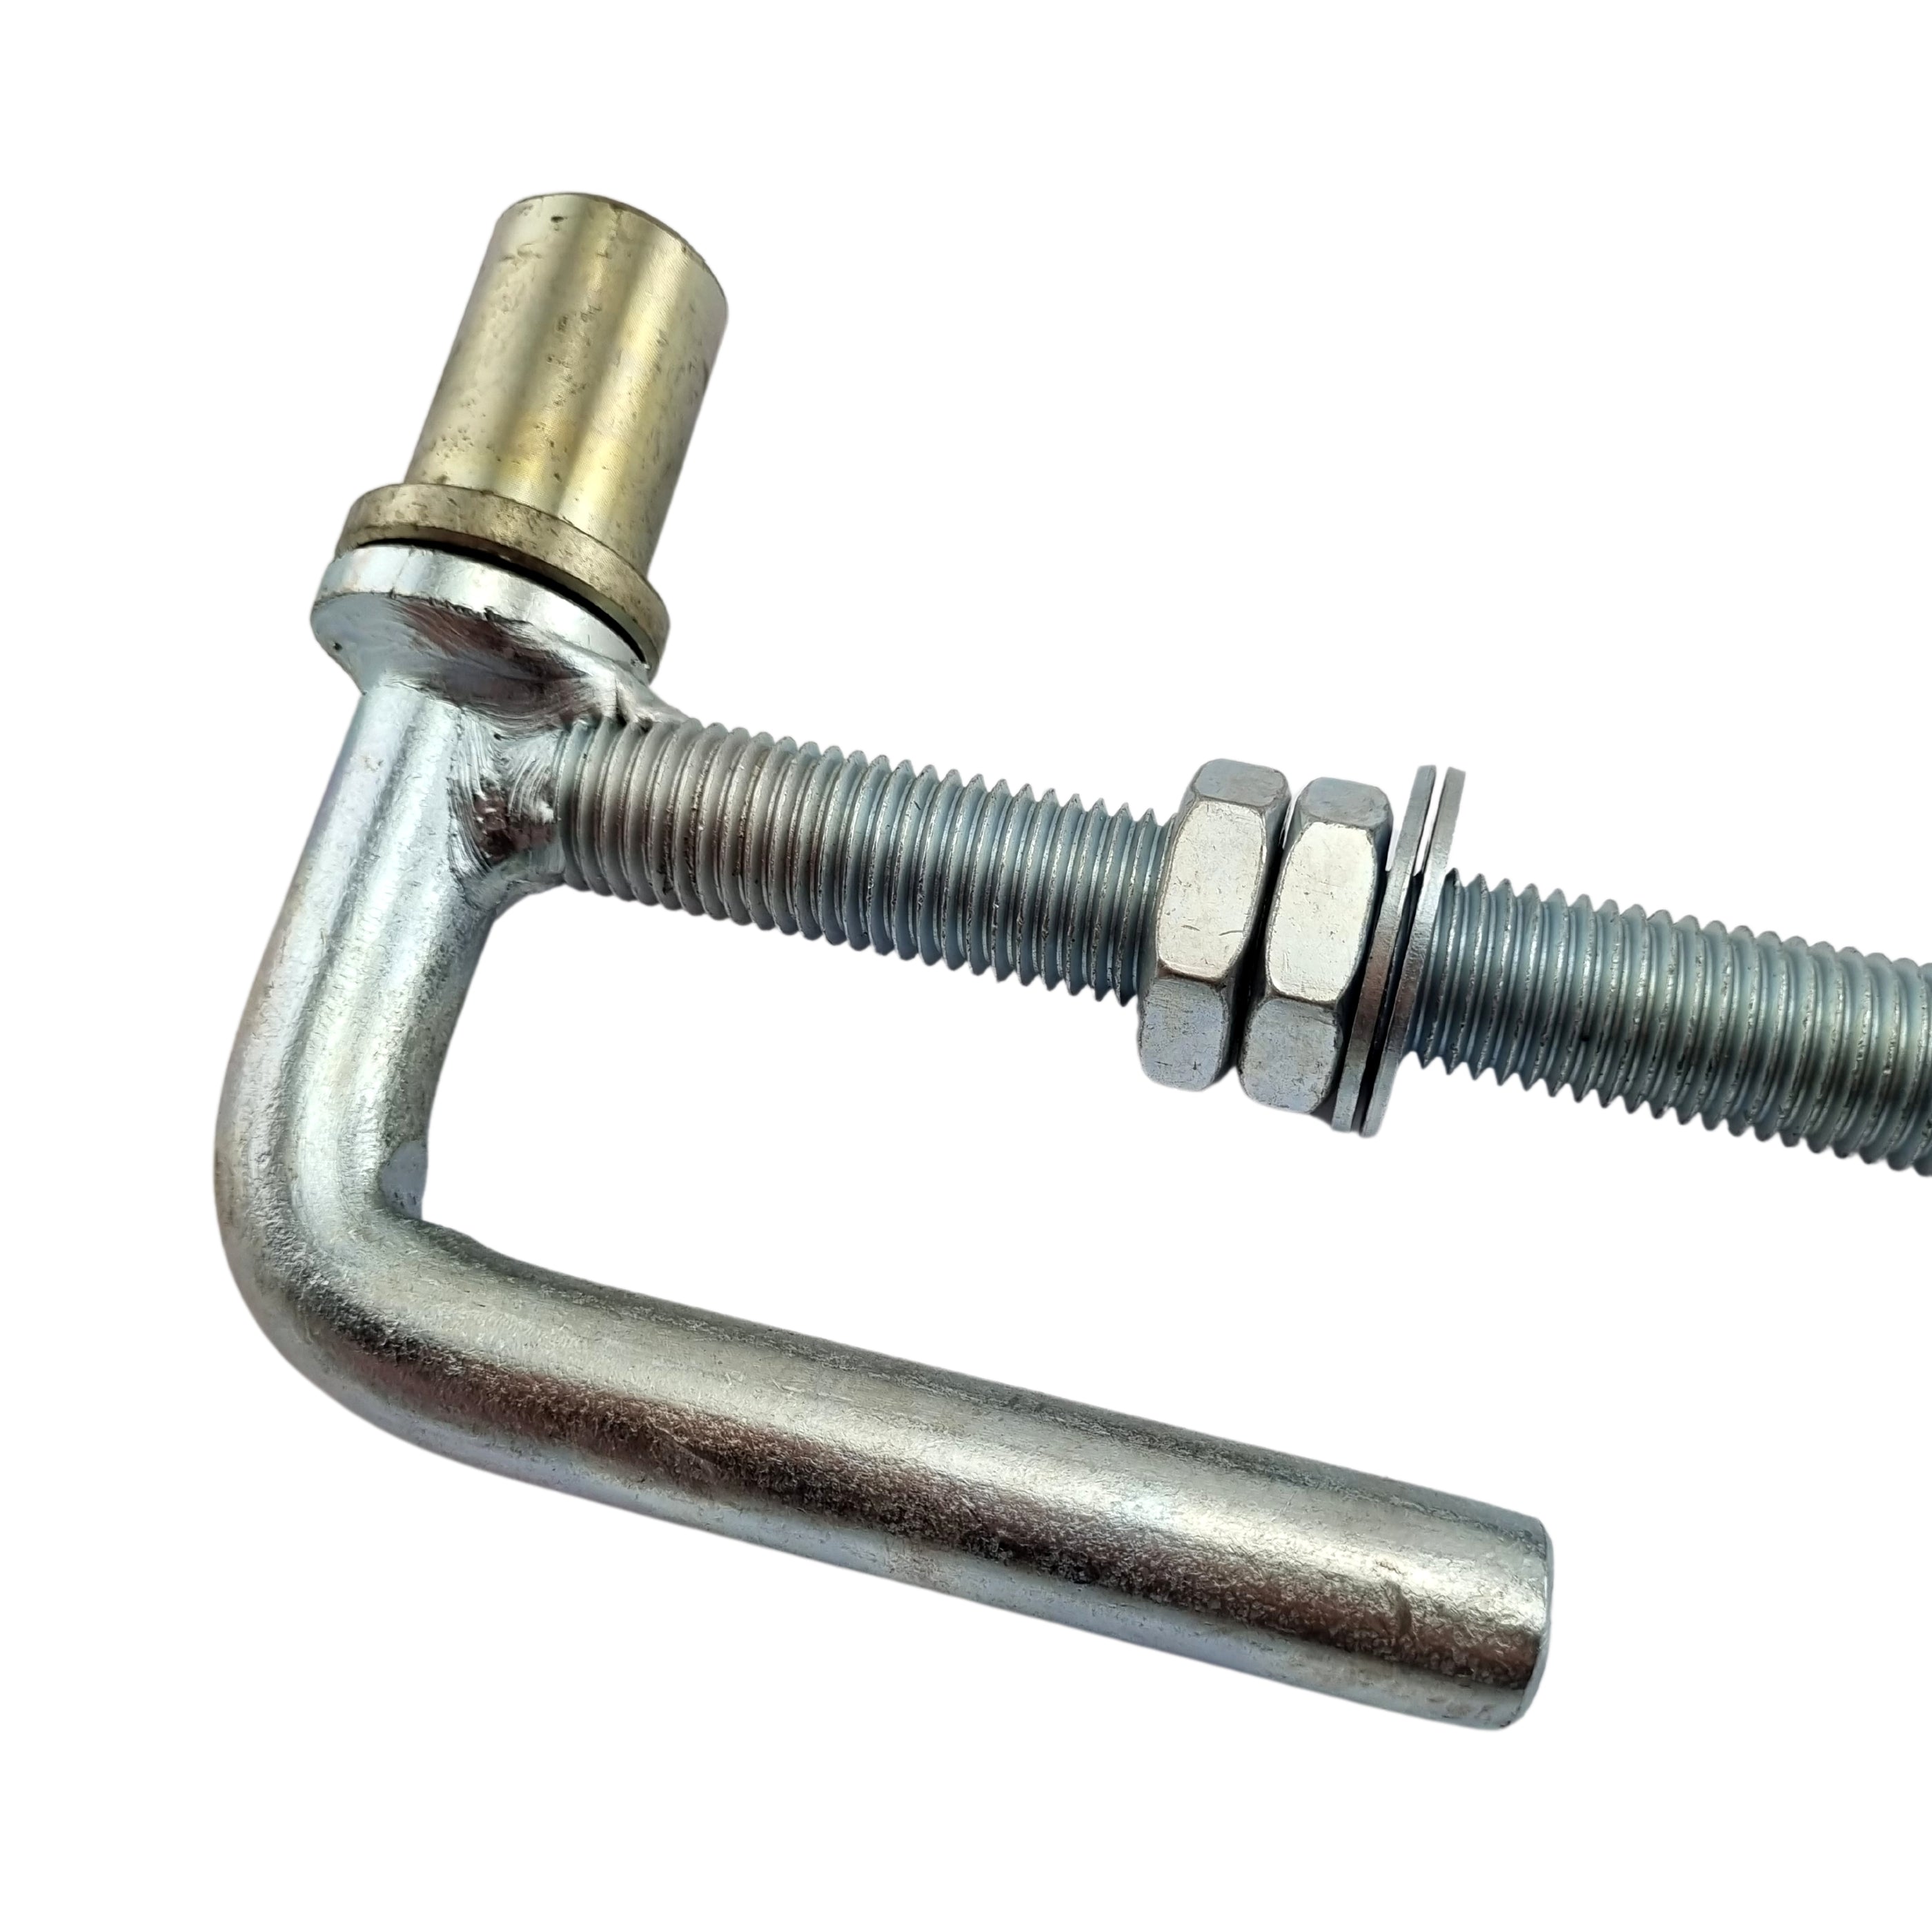 Shop hardware specifically designed for rural applications and environments. Chain.com.au